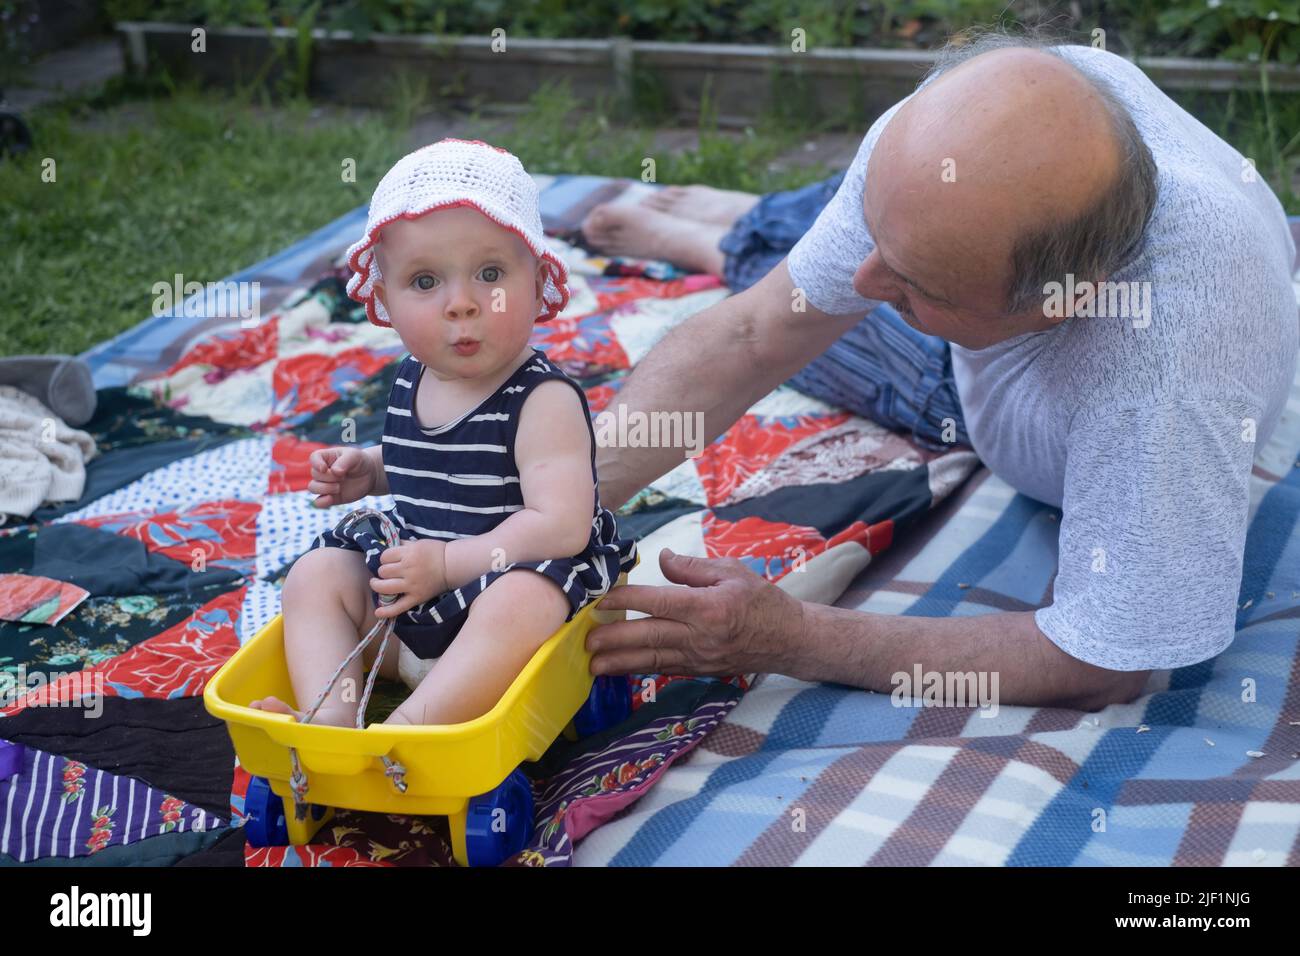 Senior grandfather playing with his grandchild on blanket outdoors pushing small cart. Stock Photo